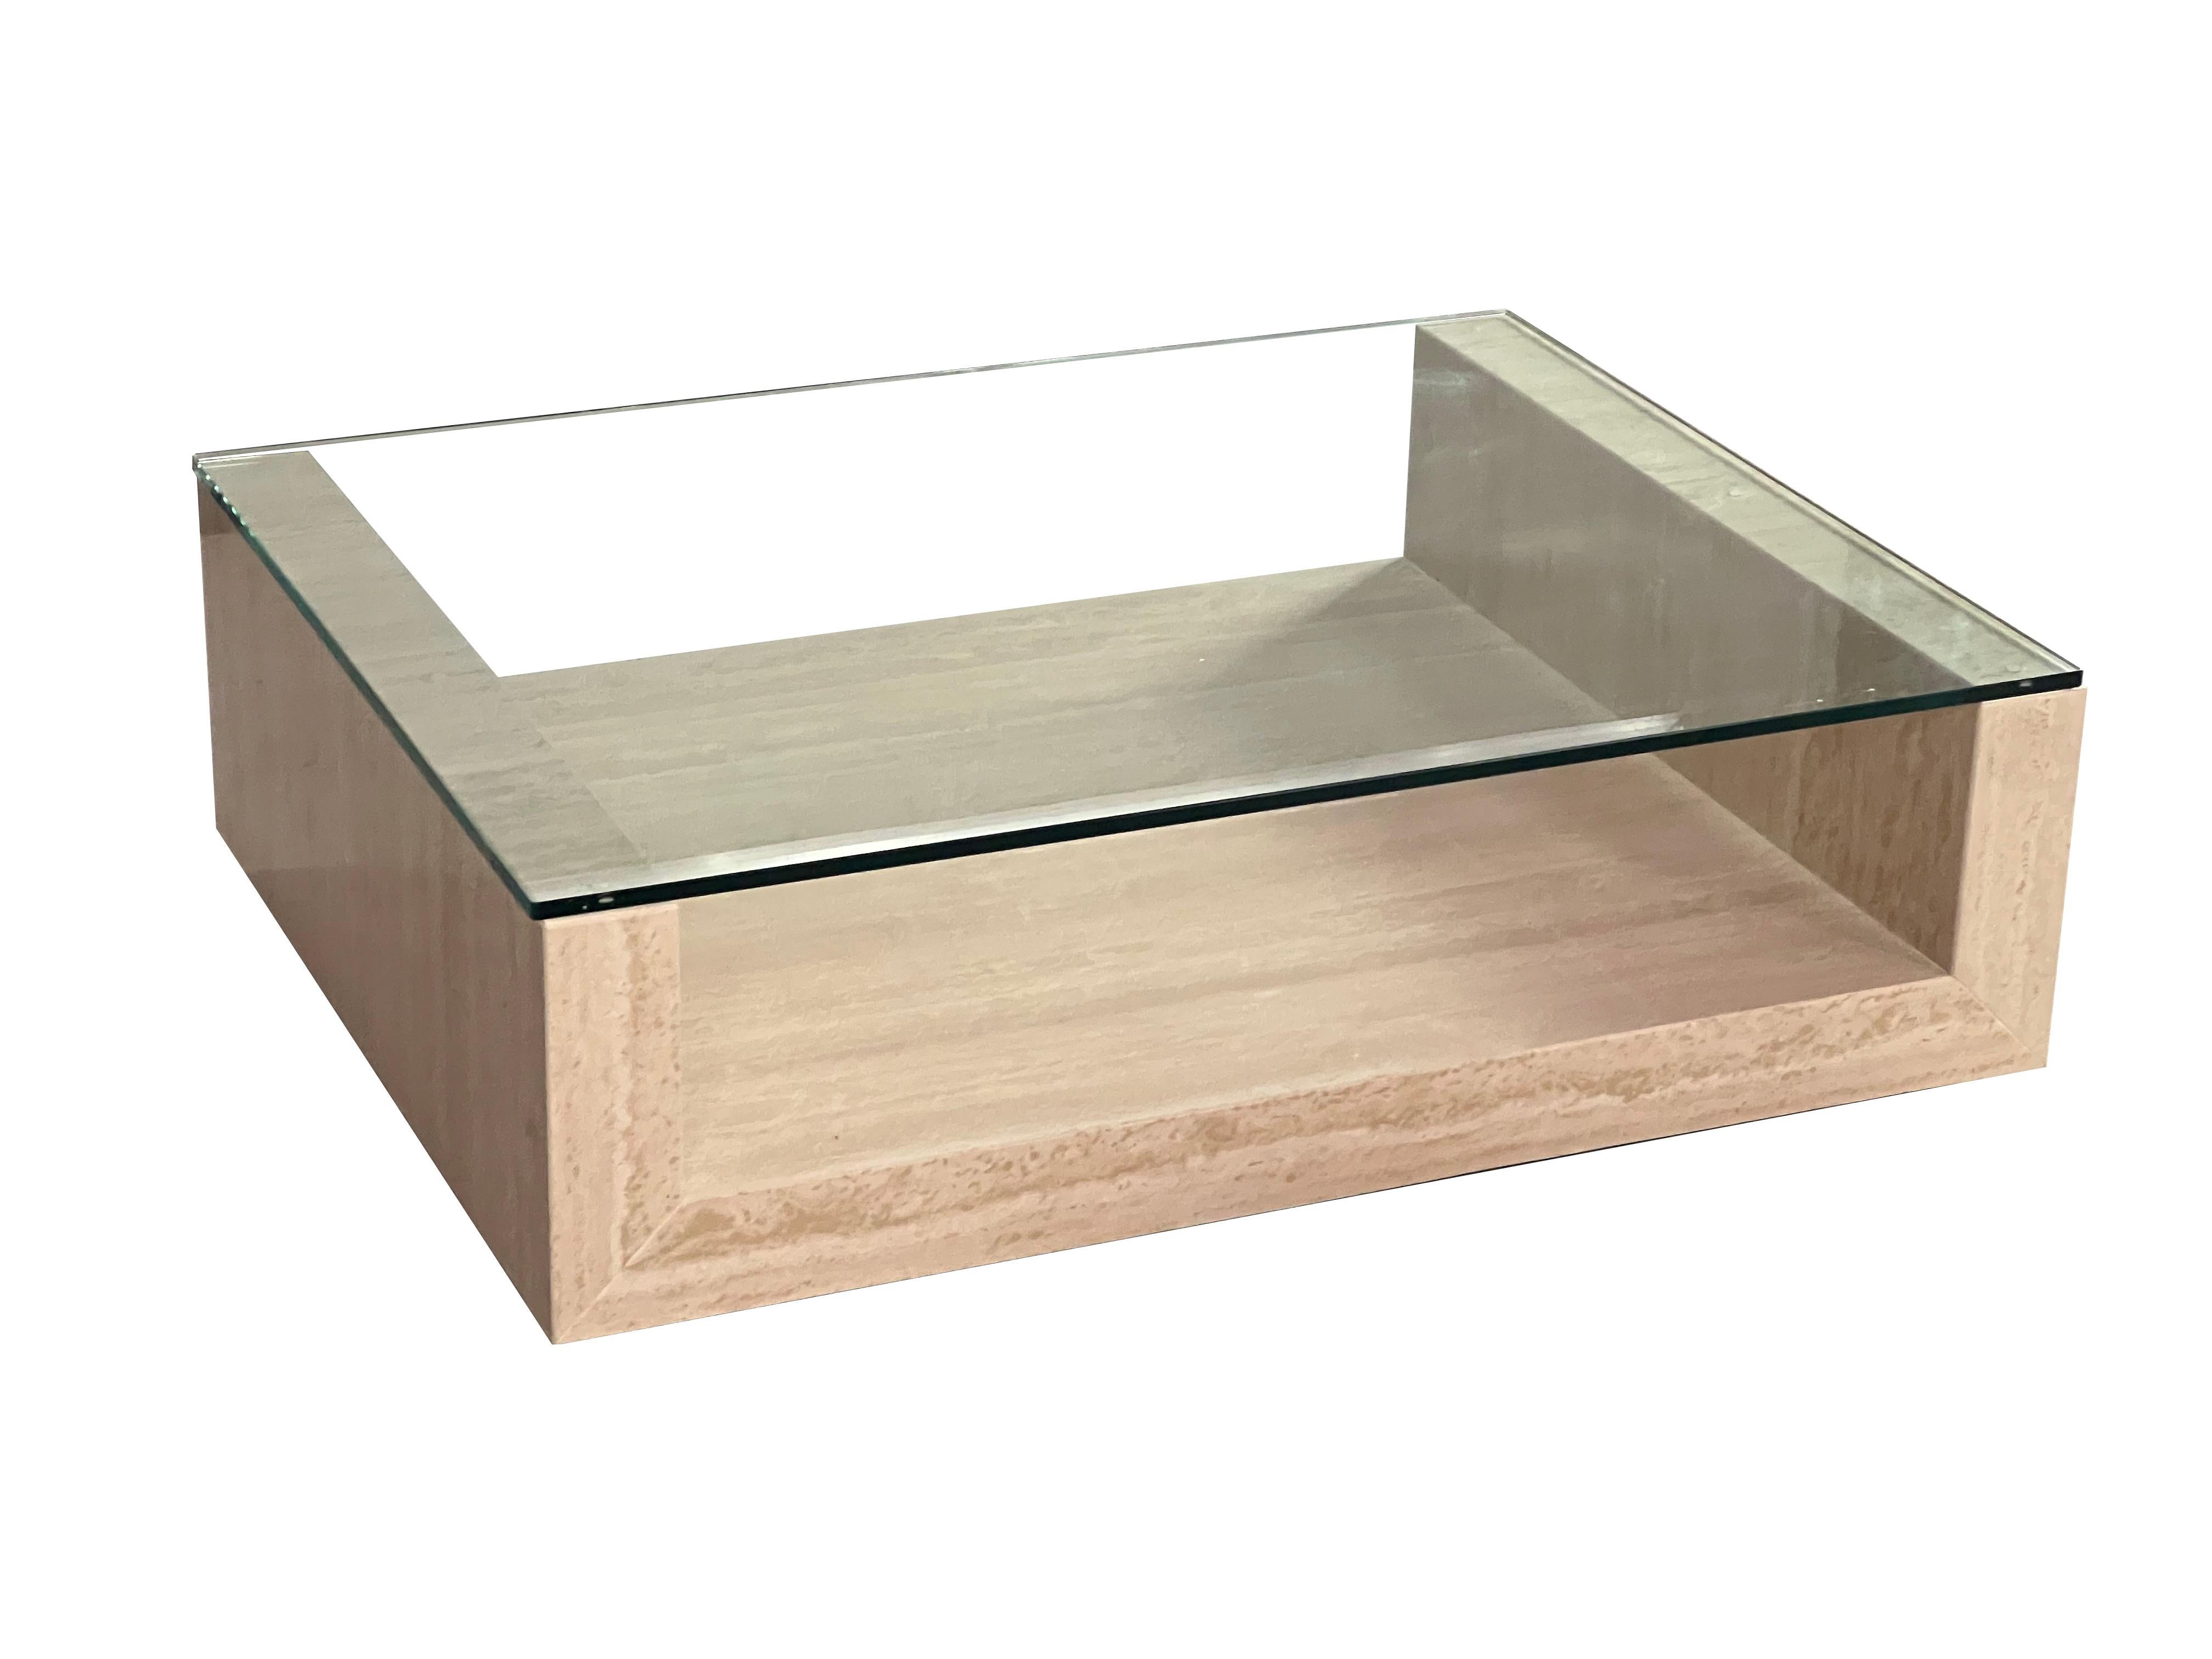 Spanish Travertine Marble AMIA Table Contemporary Design Made in Spain Meddel in Stock For Sale